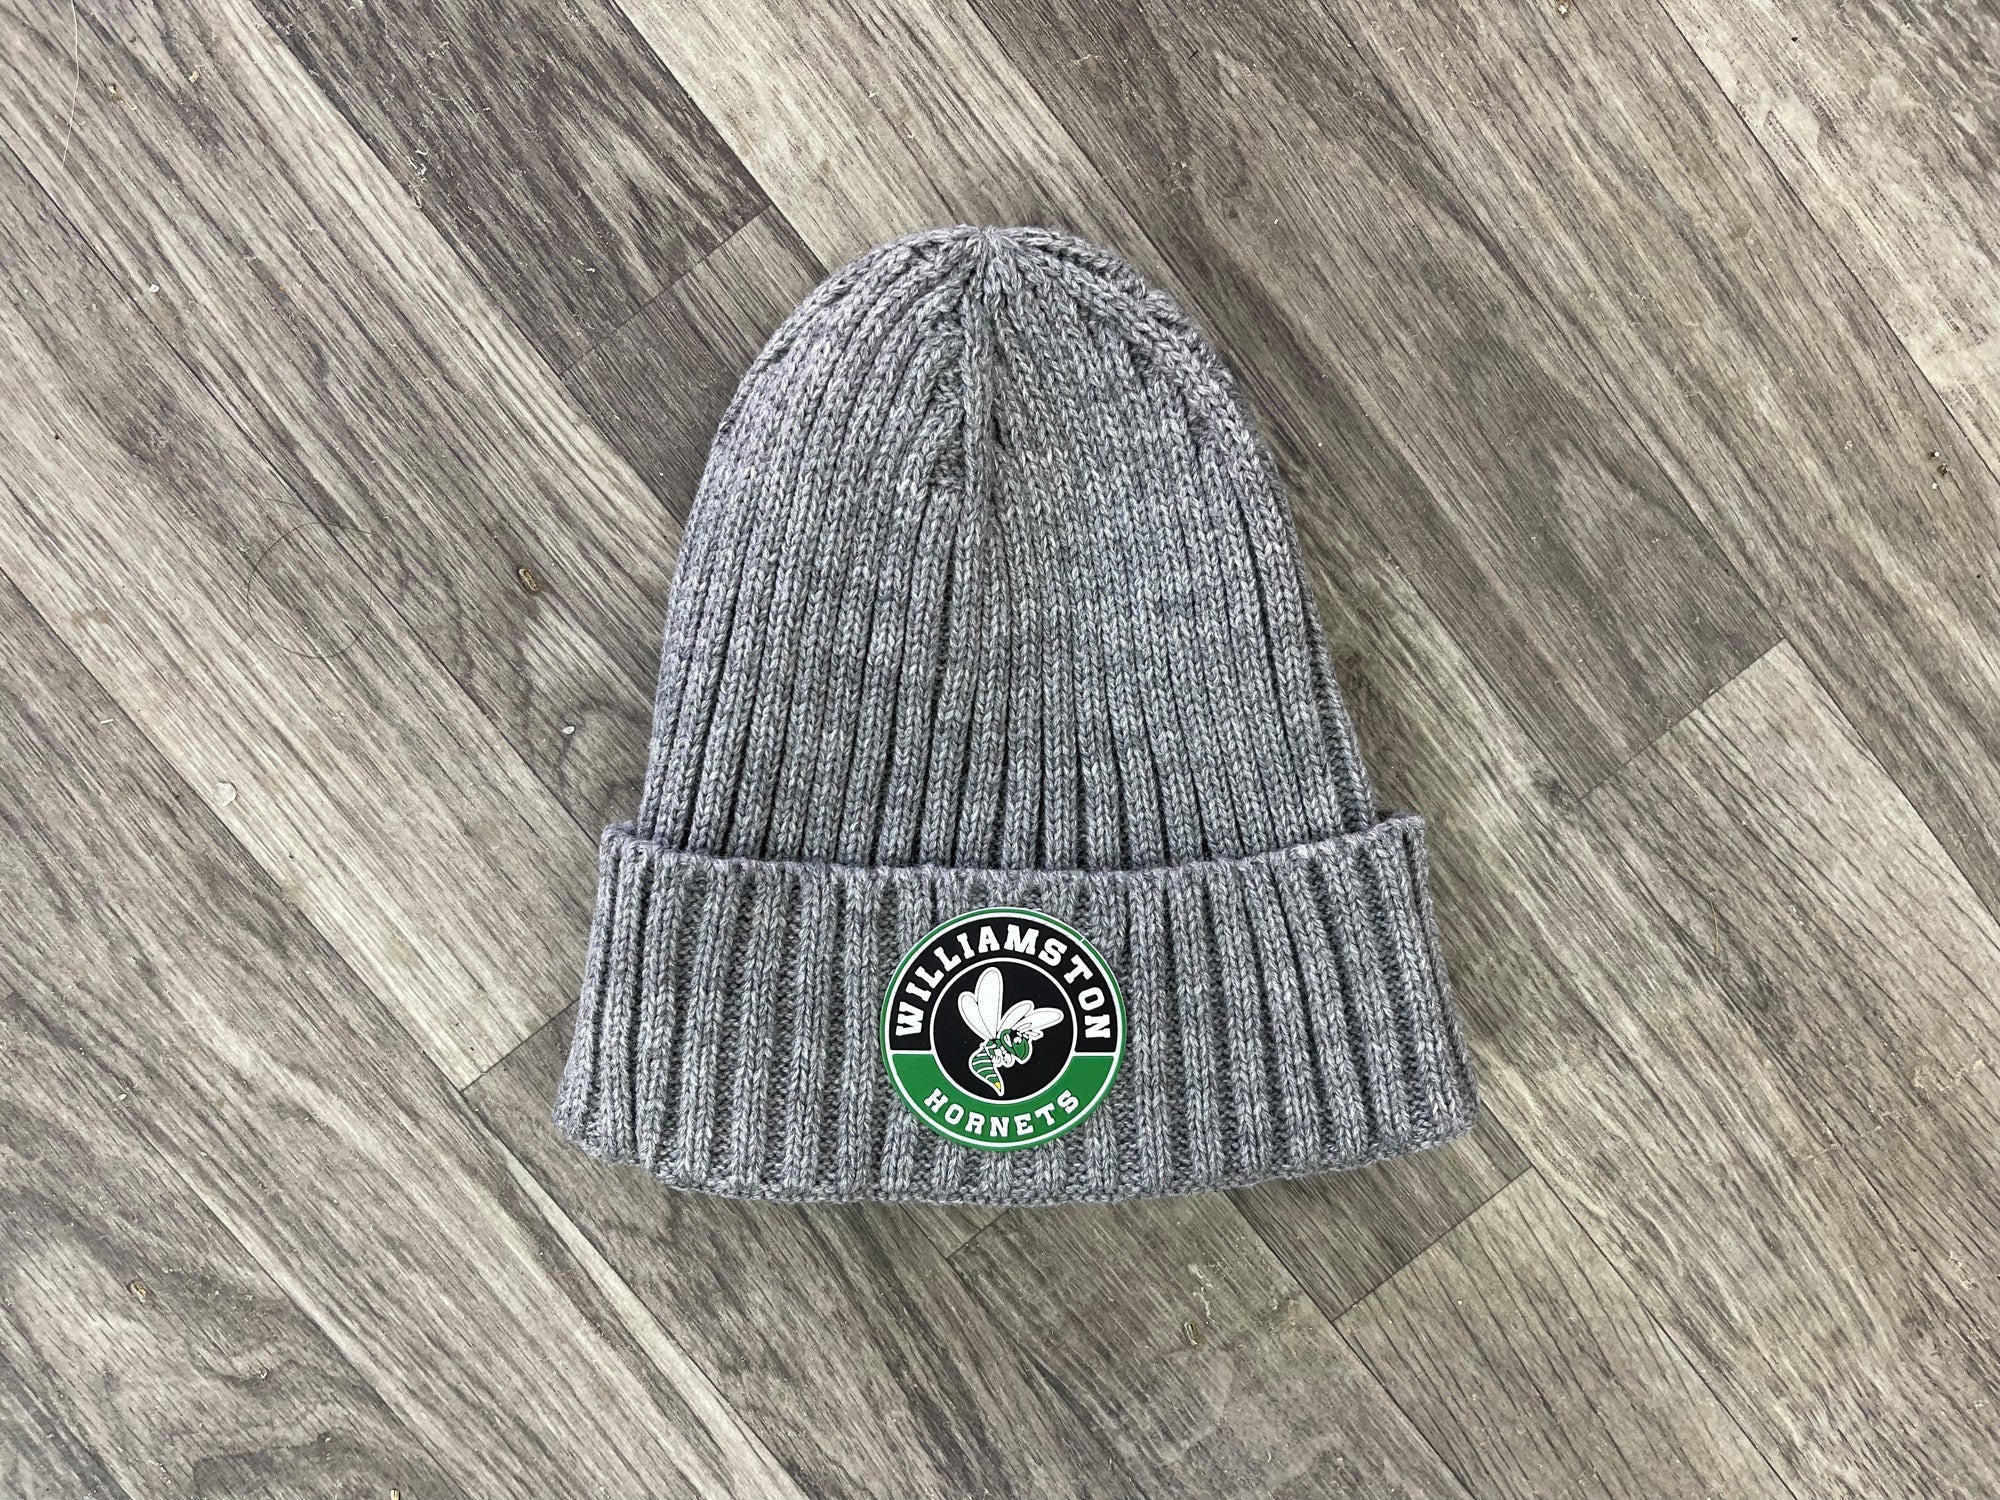 "Williamston" Hornet - Circle Rubber Patch - Gray Beanie